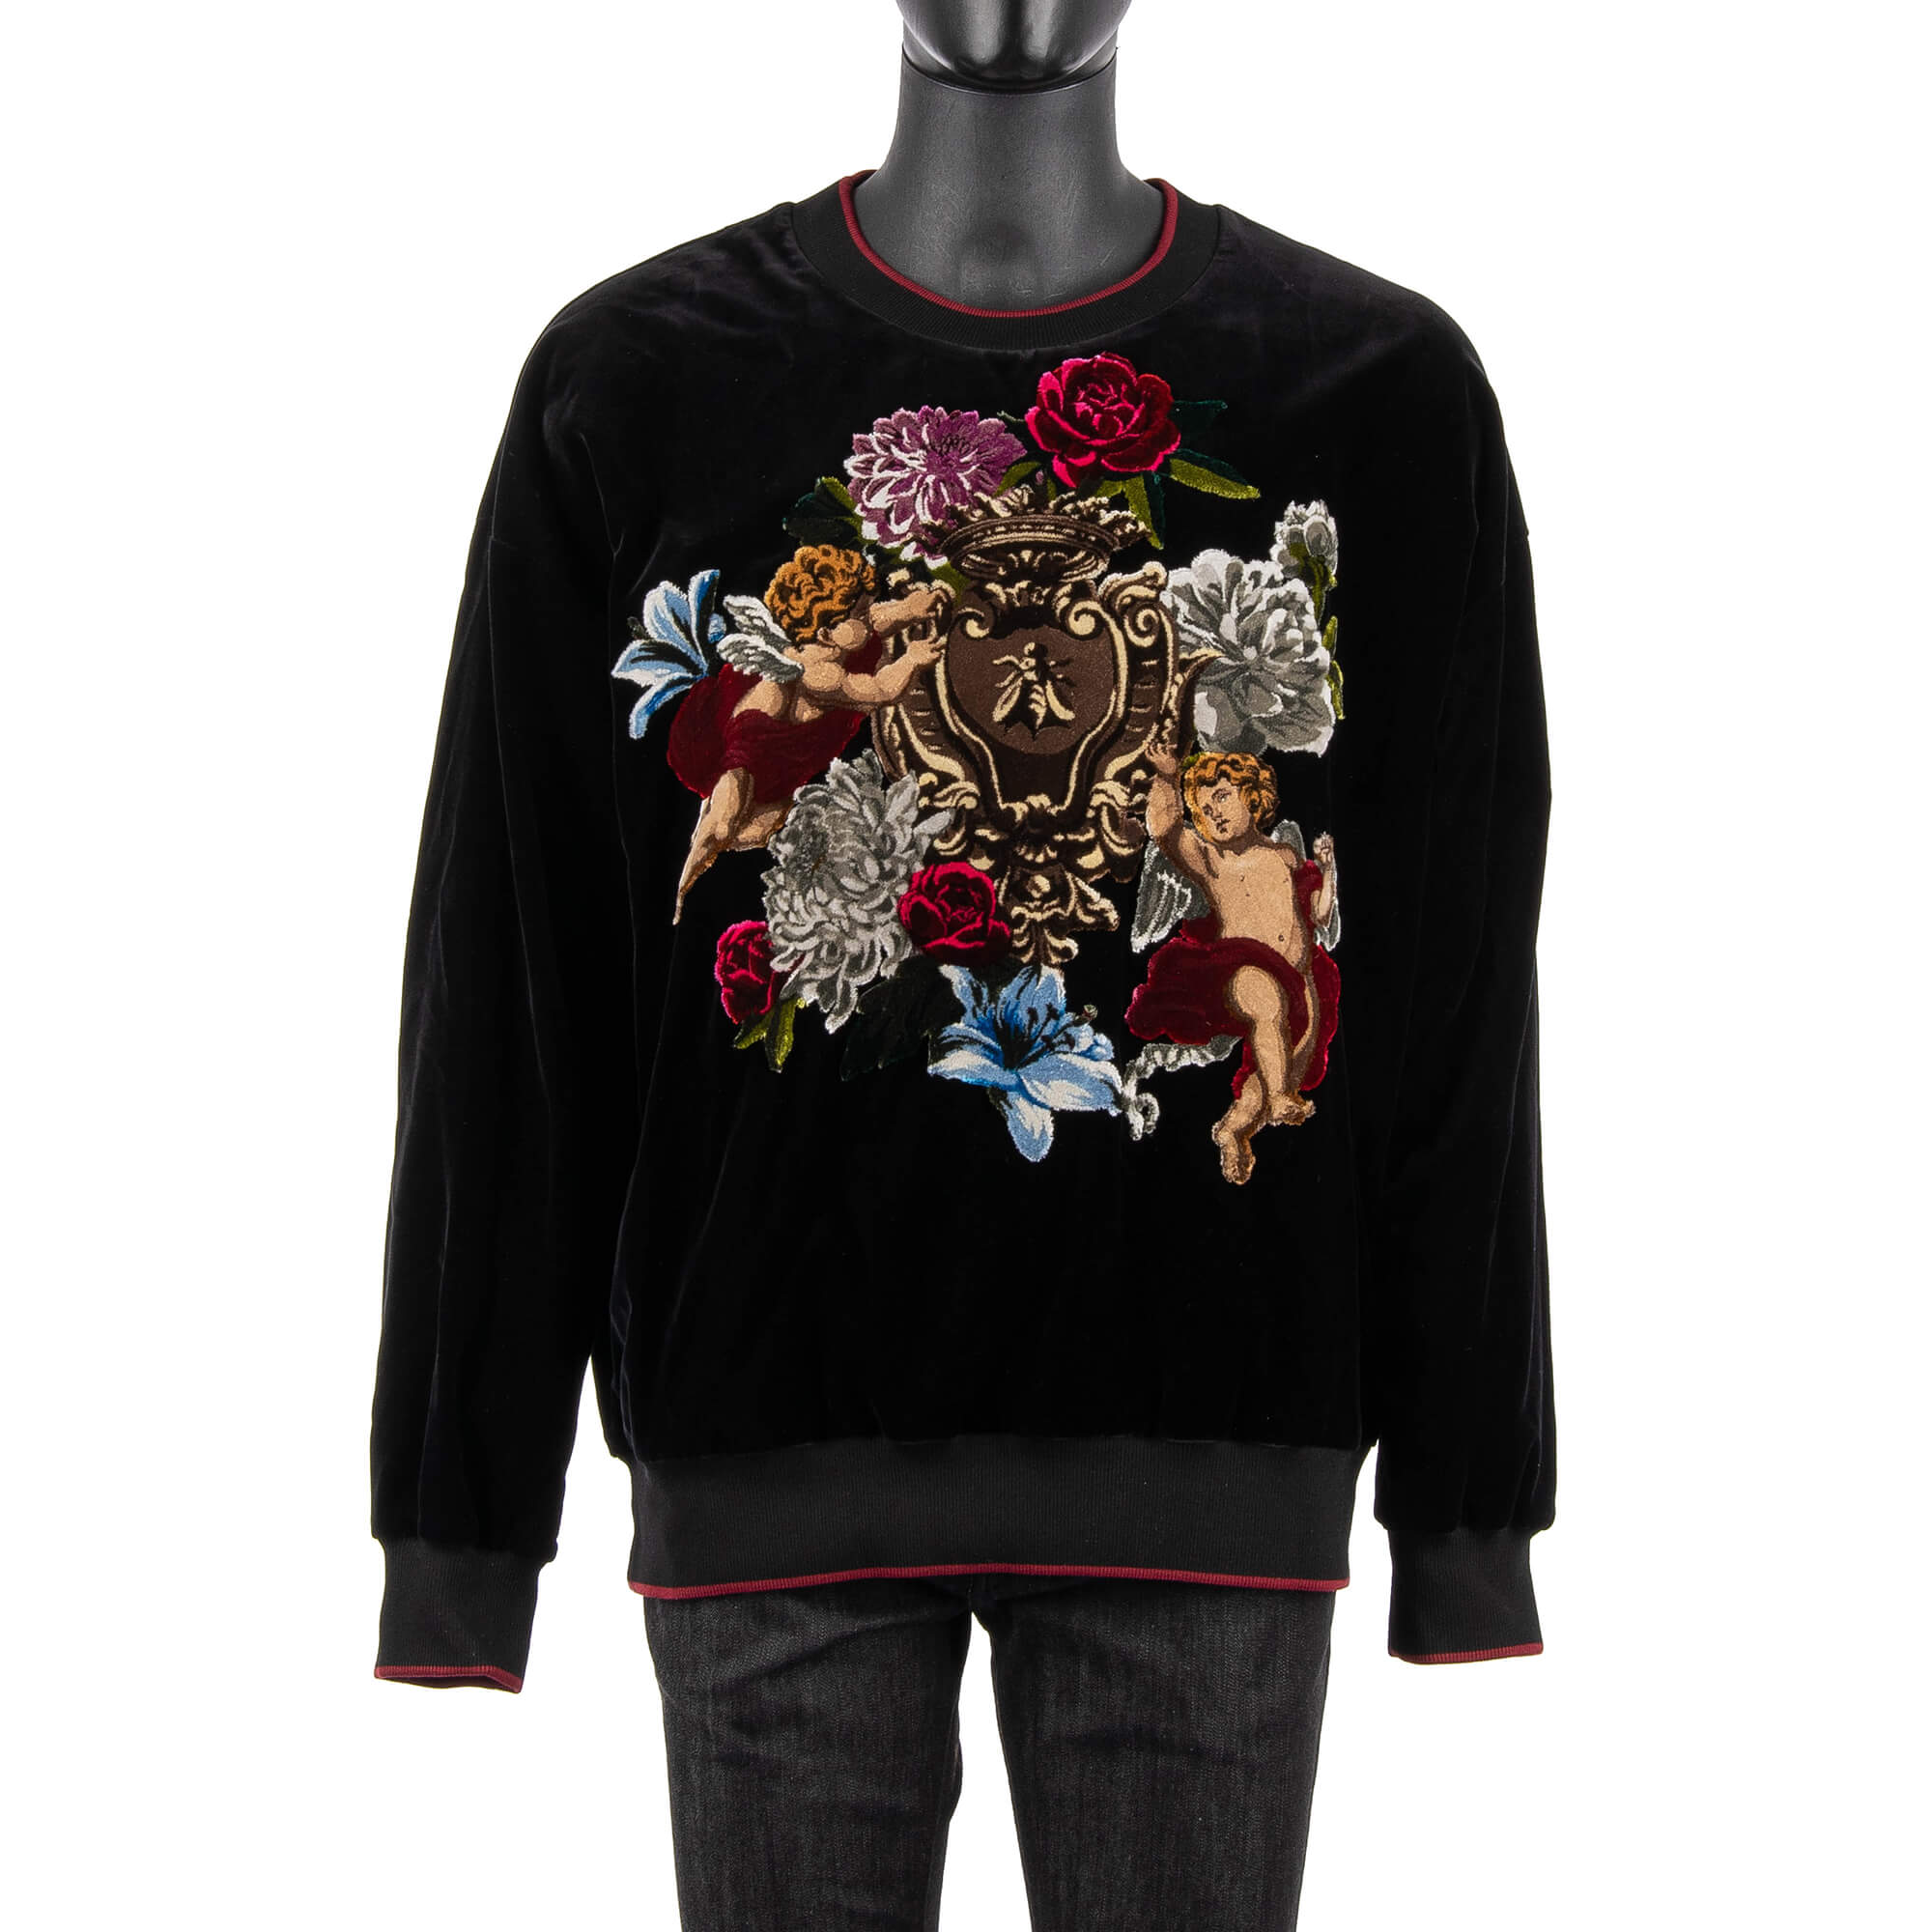 Velvet-Sweater-with-Baroque-Angels-and-Flowers-Application-Black-Red-1.jpg